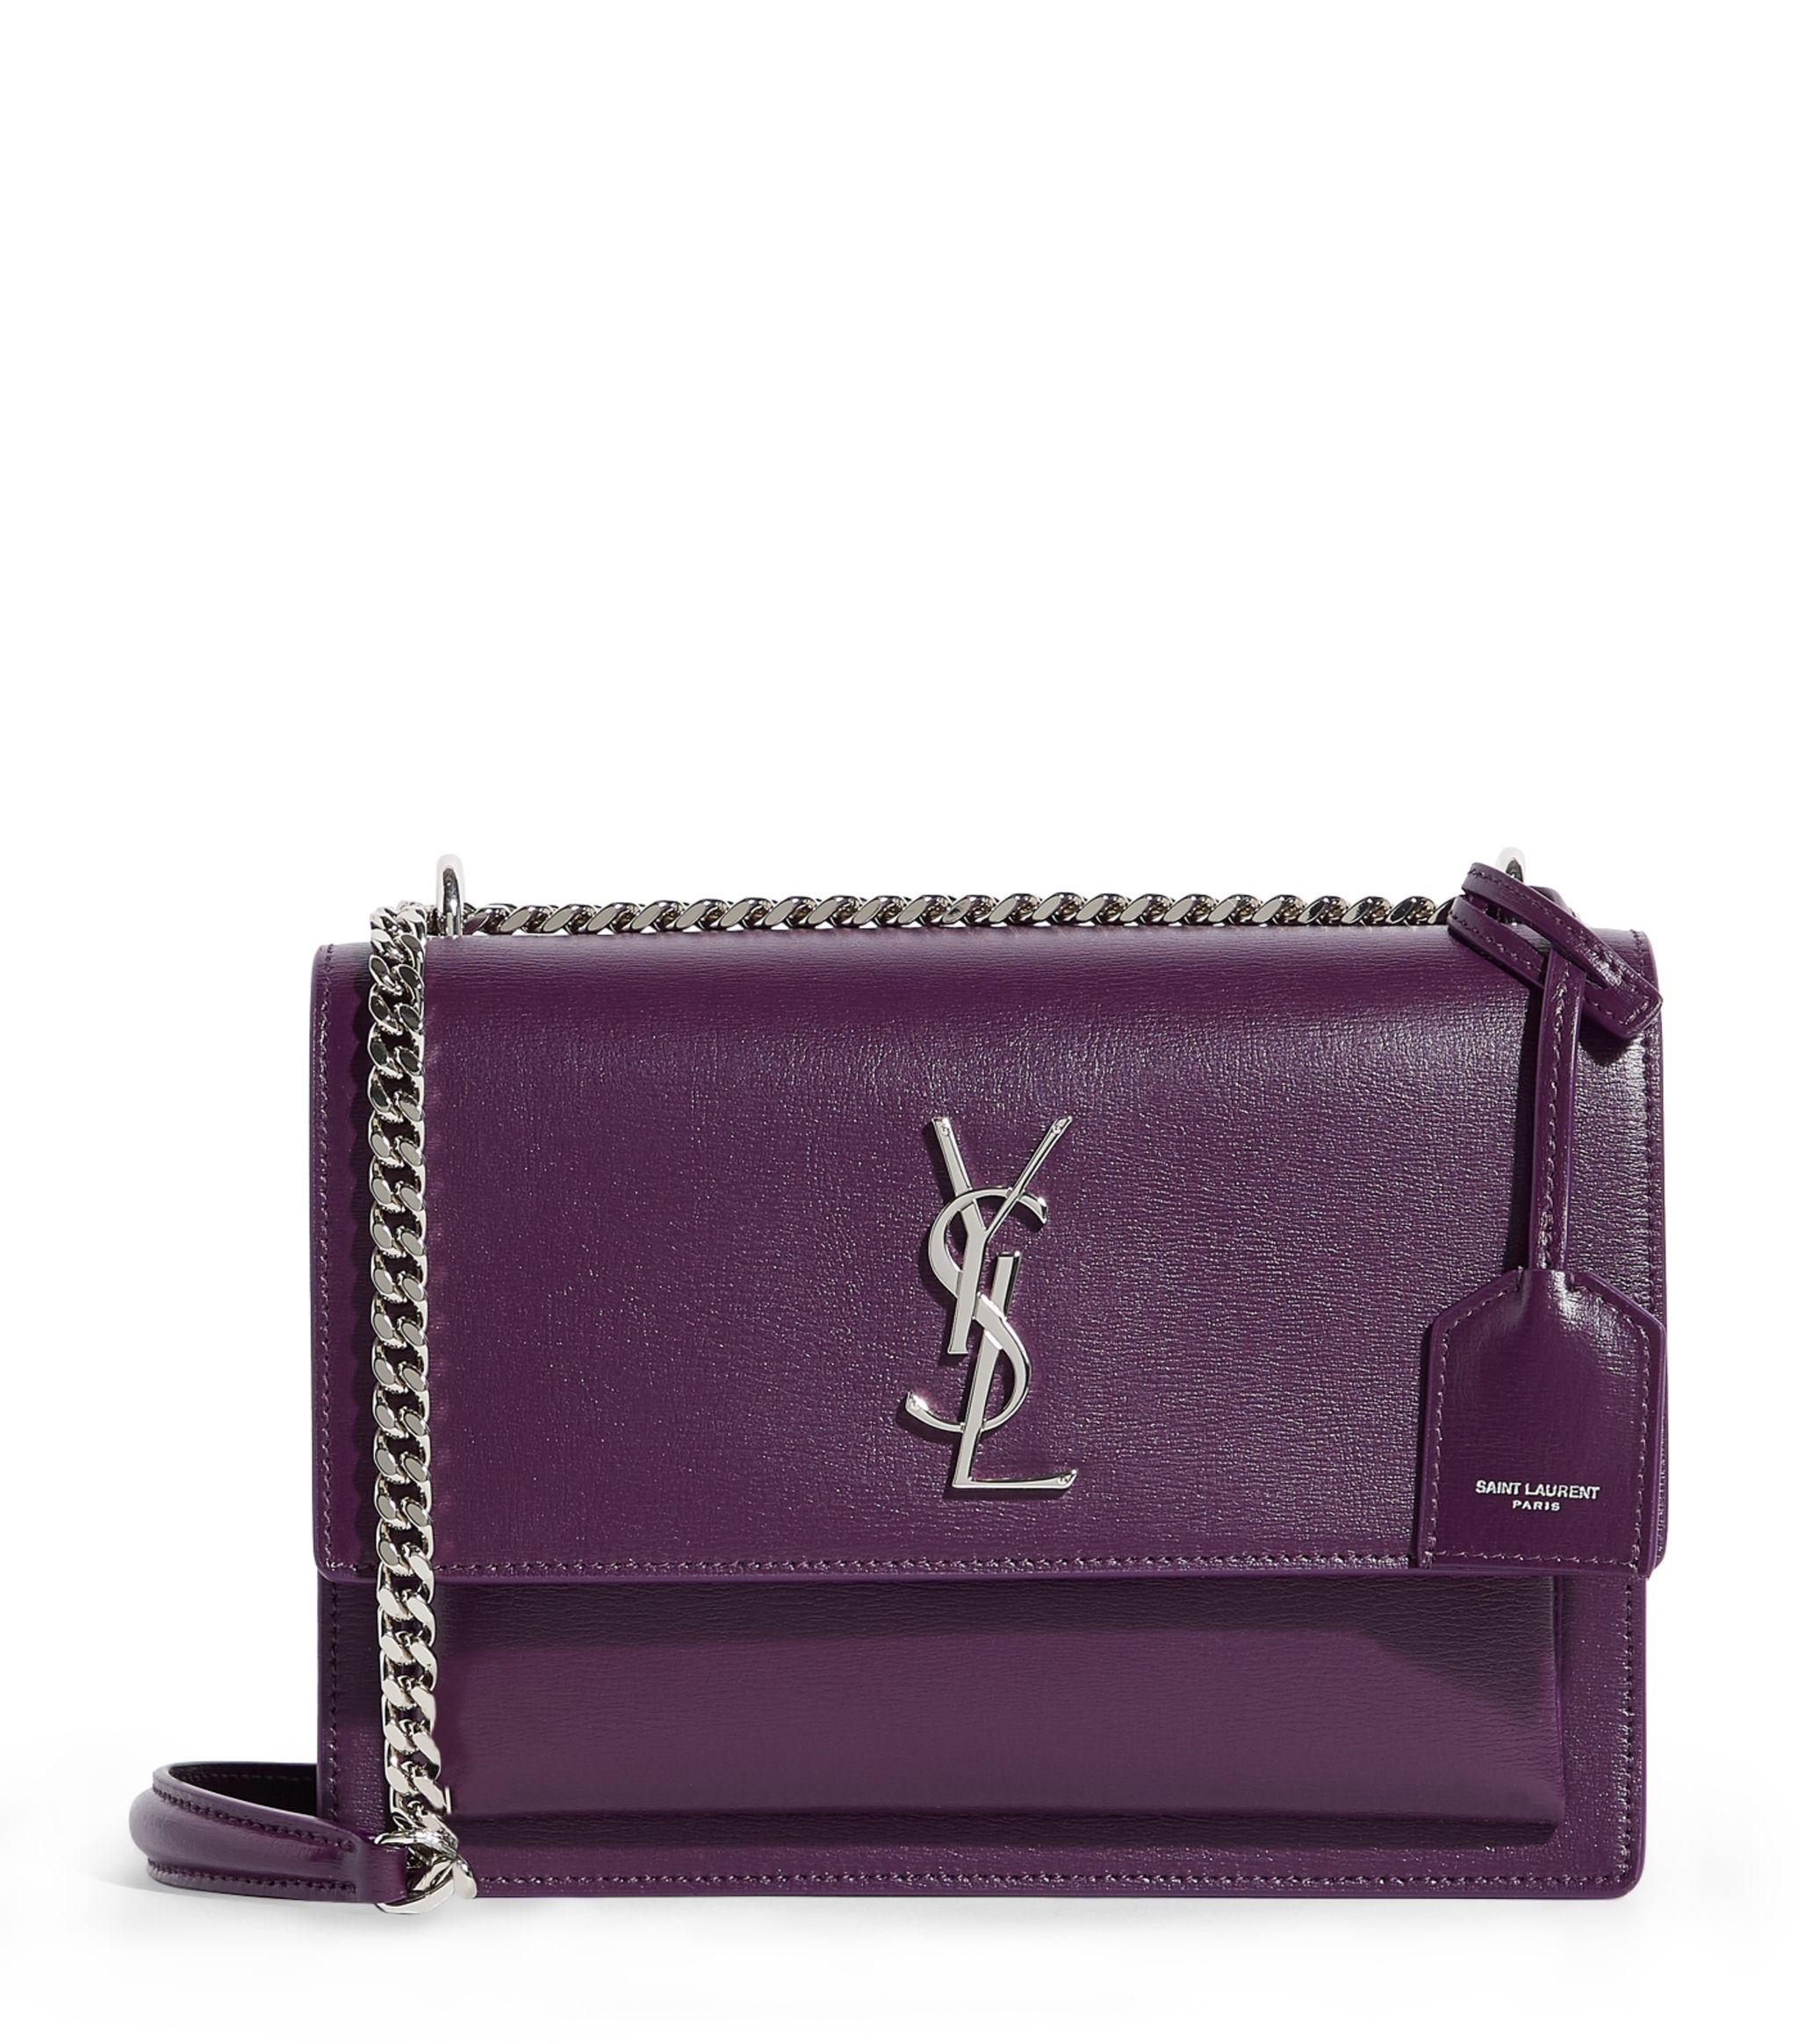 My first YSL, limited edition Sunset bag in purple python leather